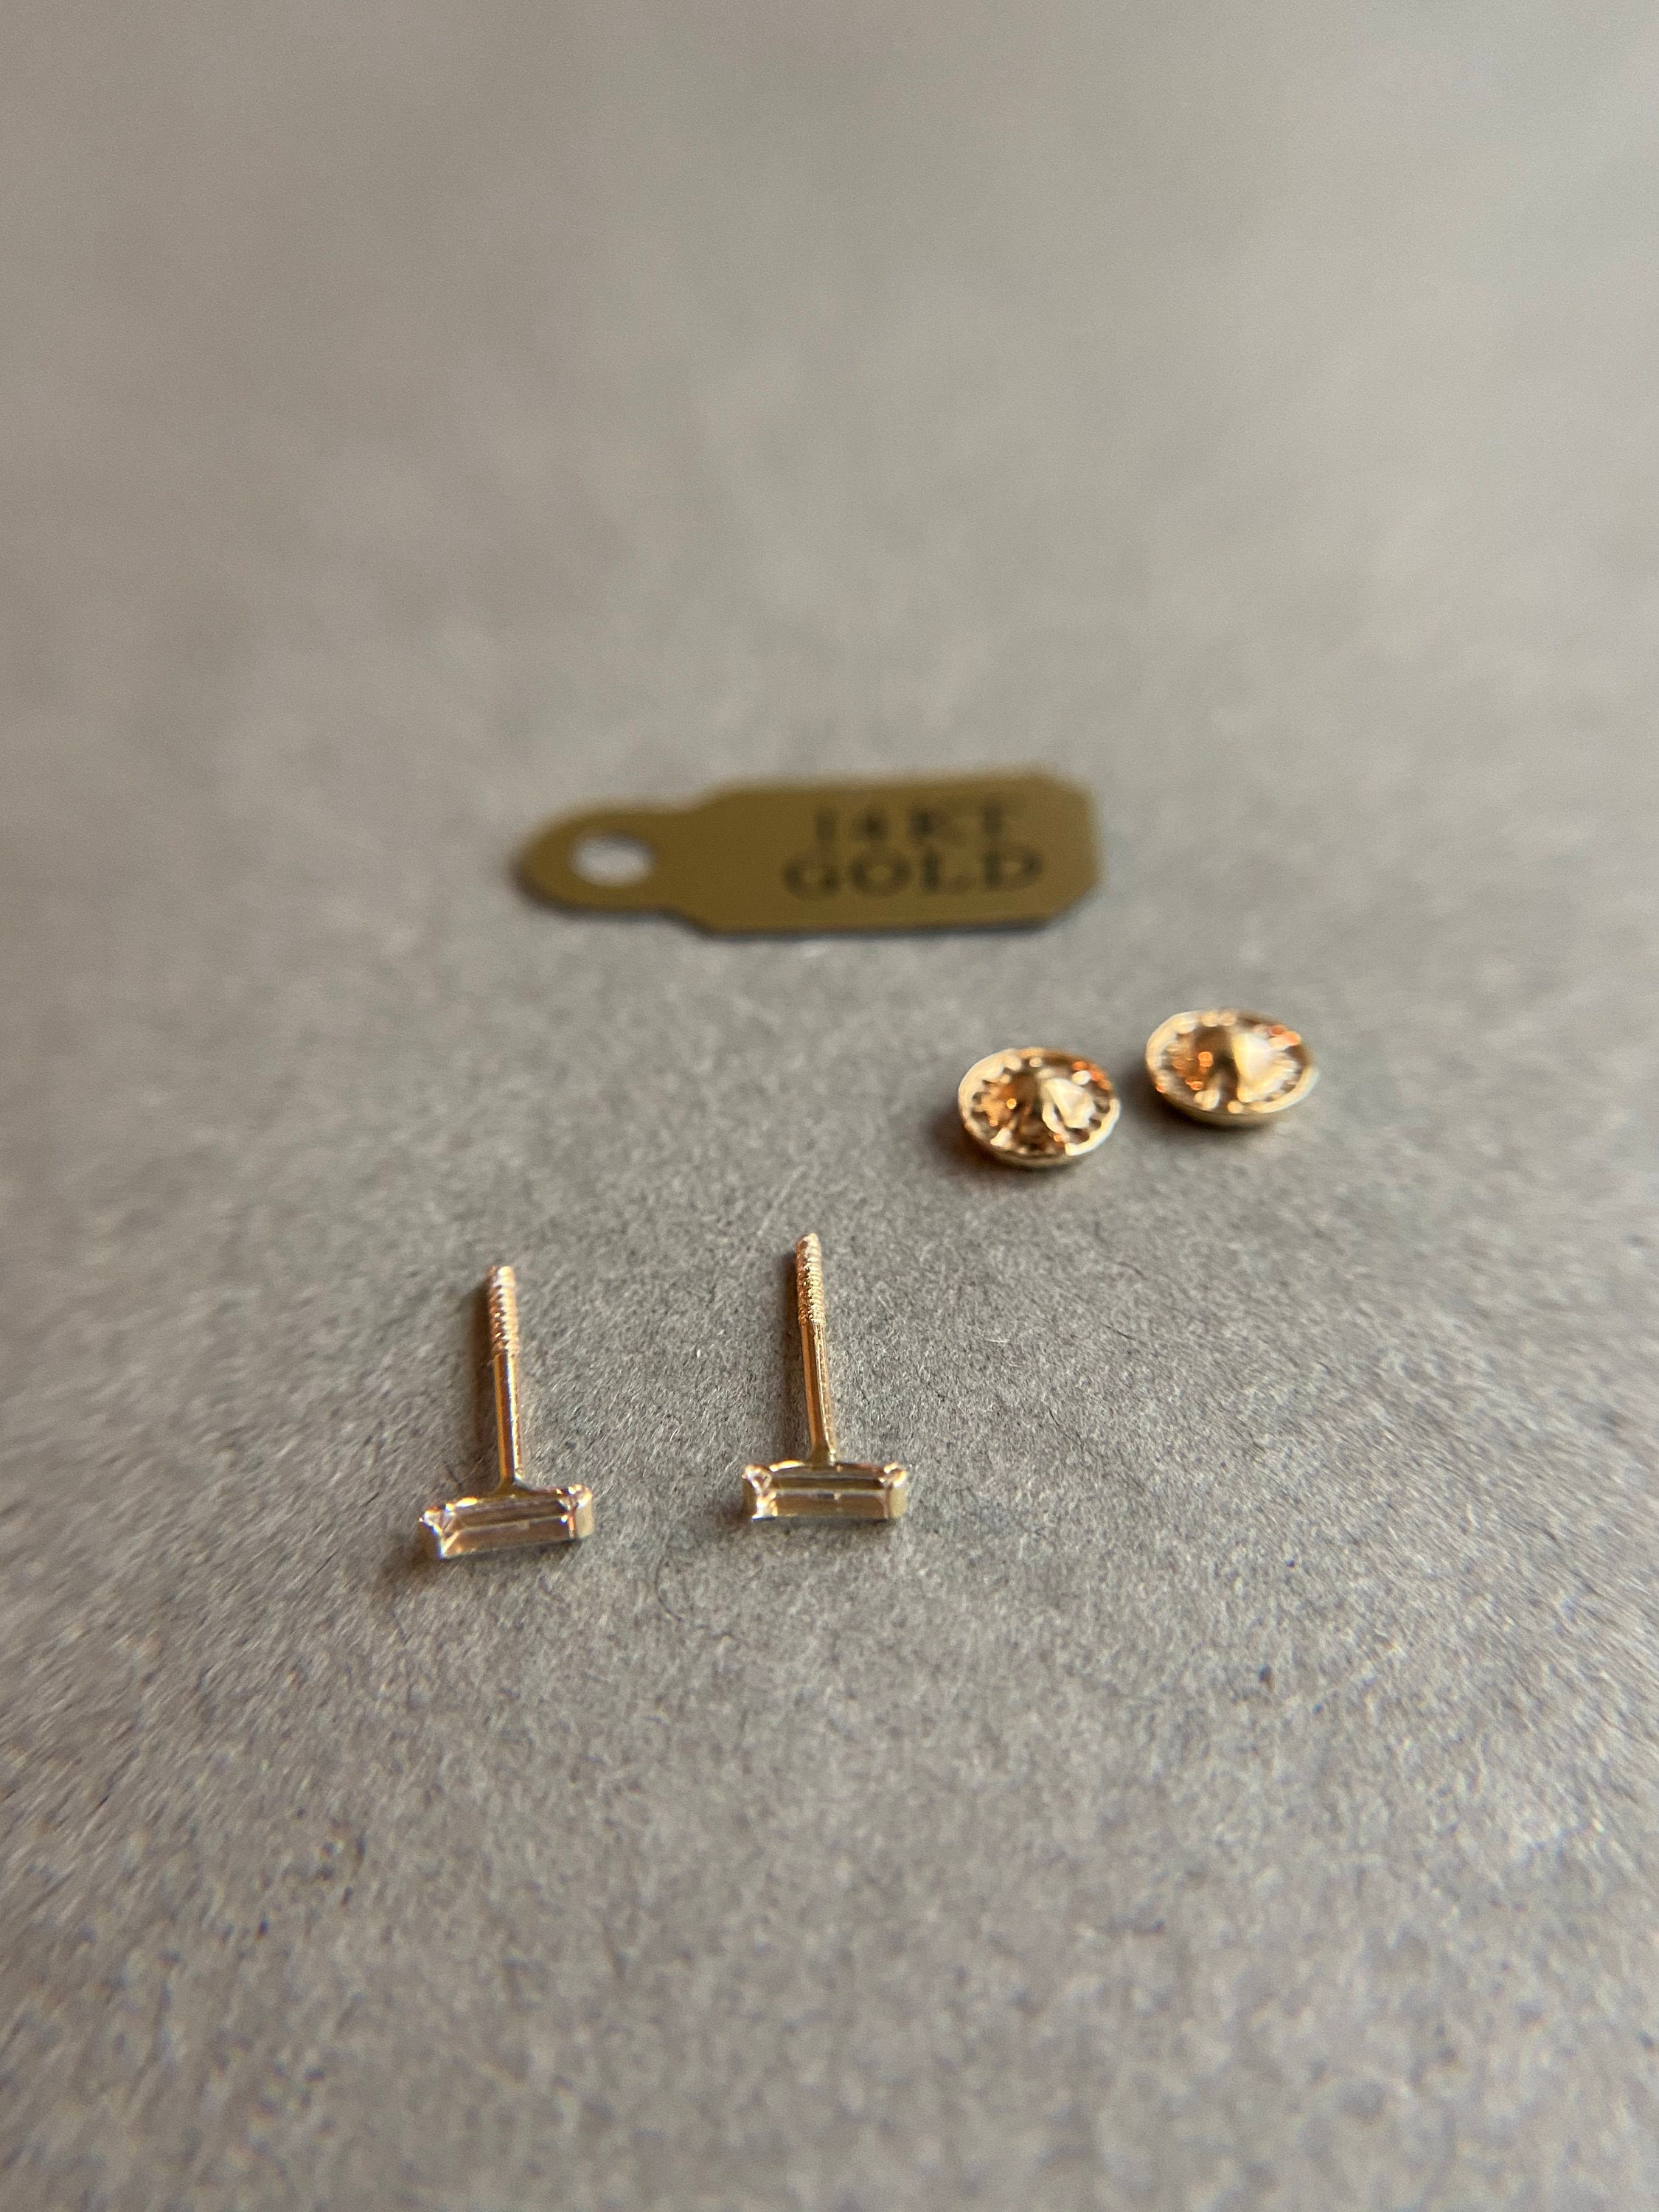 Tiny 14k Solid Gold Ear Nuts / Gold Earring Backs for Thin Post Stud  Earrings 24 or 22 Gauge Posts, Sold Individually, Made in the USA 